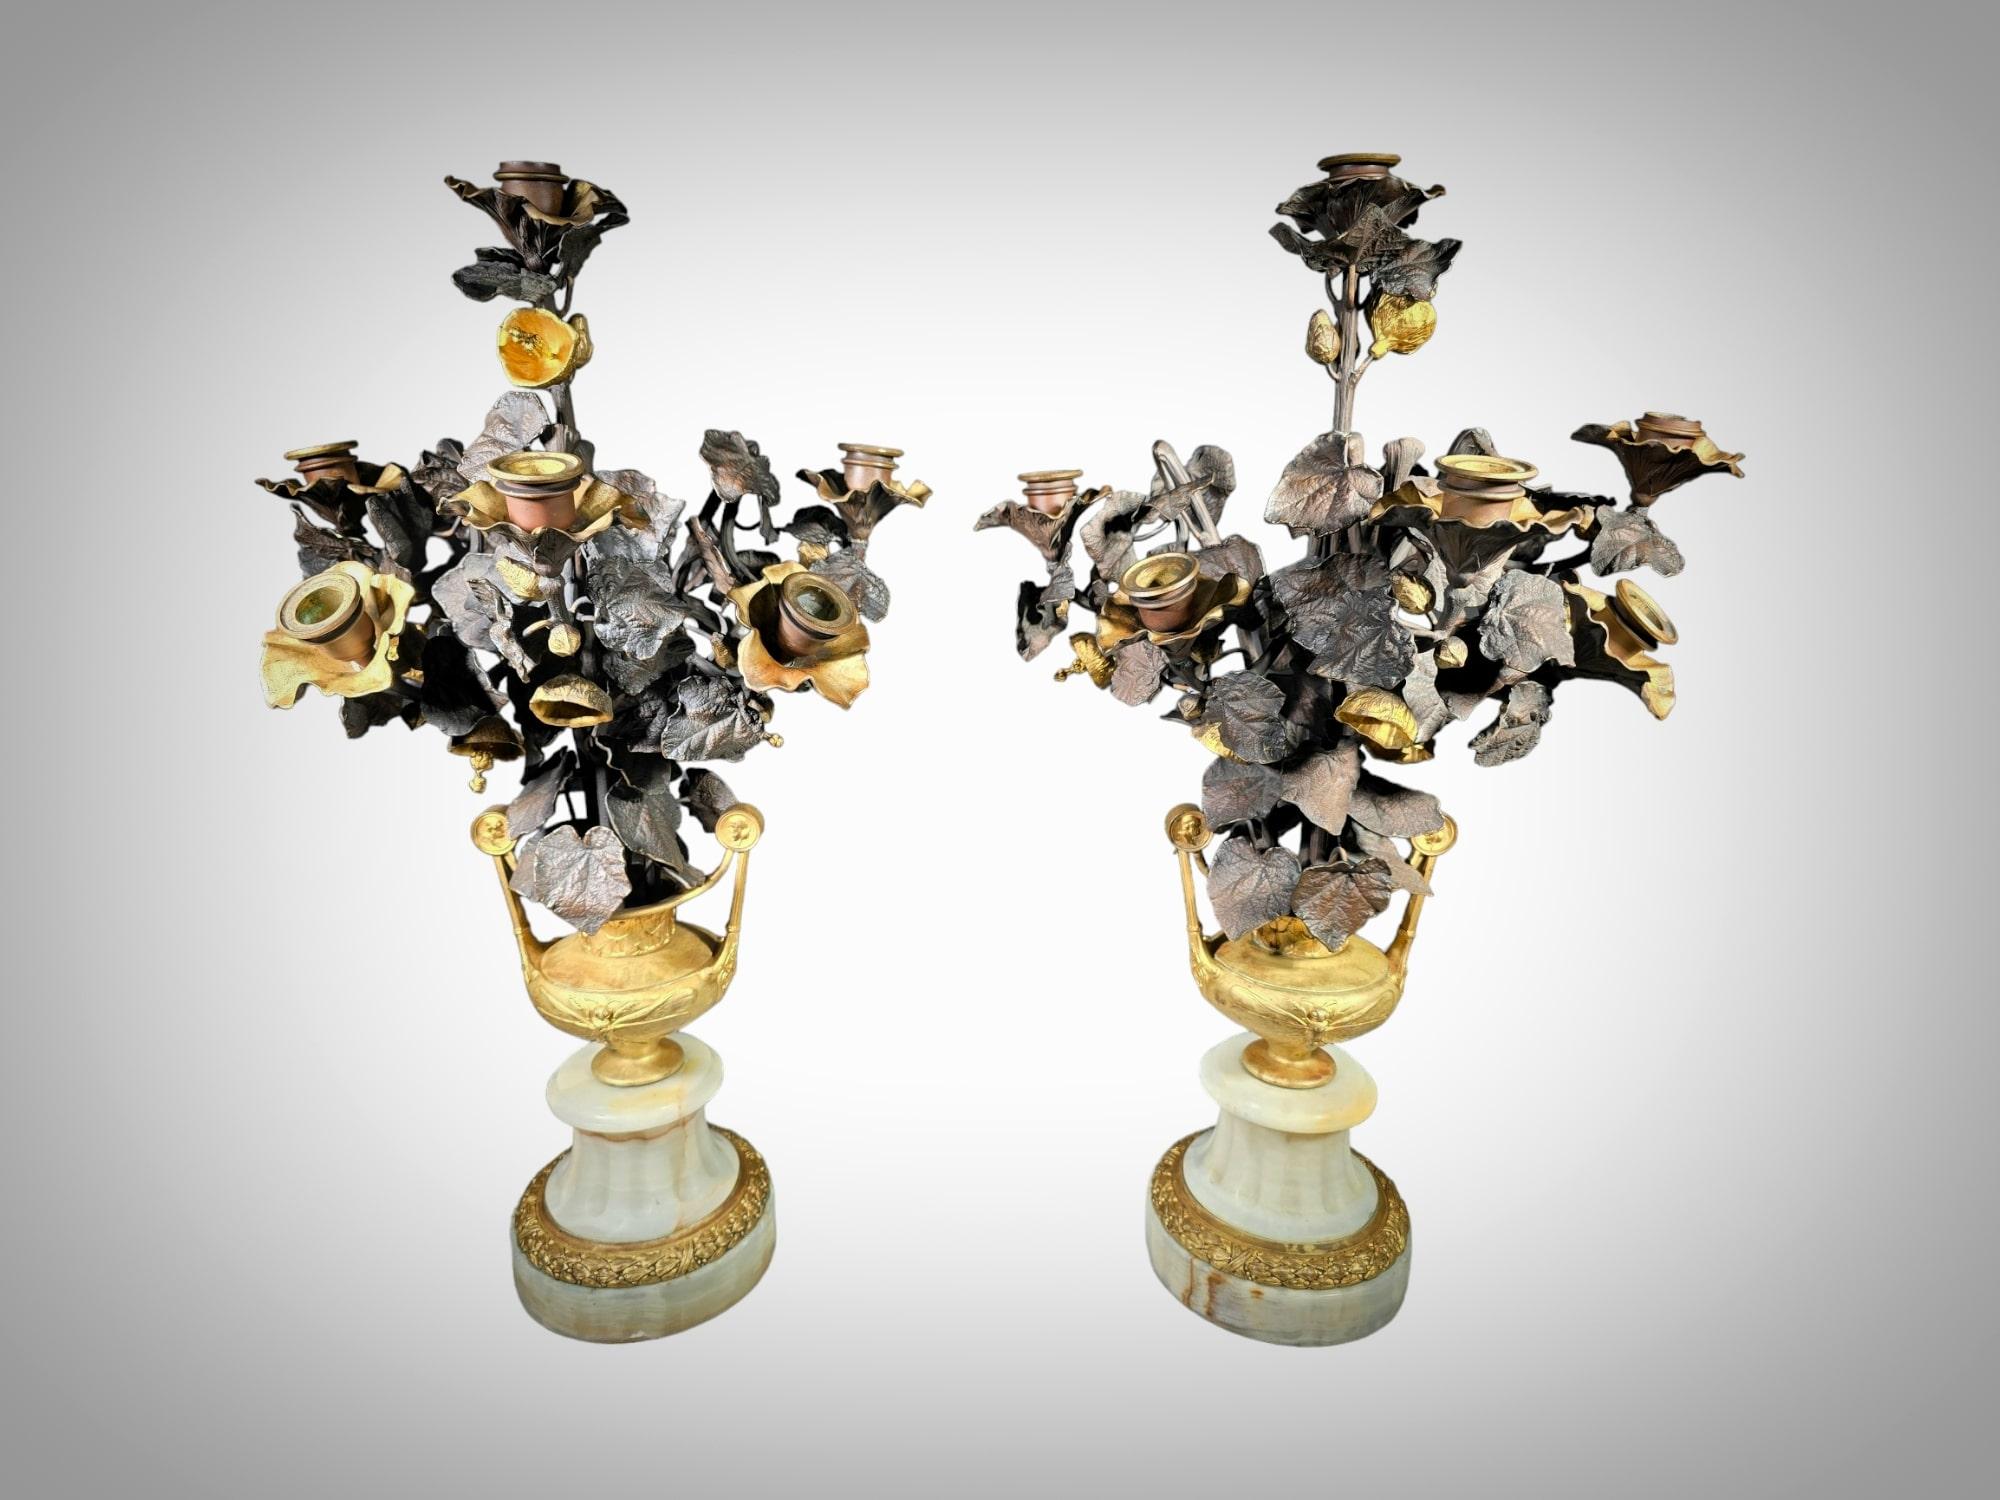 Stunning Gilt Bronze Vases with Flowers, Possibly Italian from the 19th Century For Sale 10